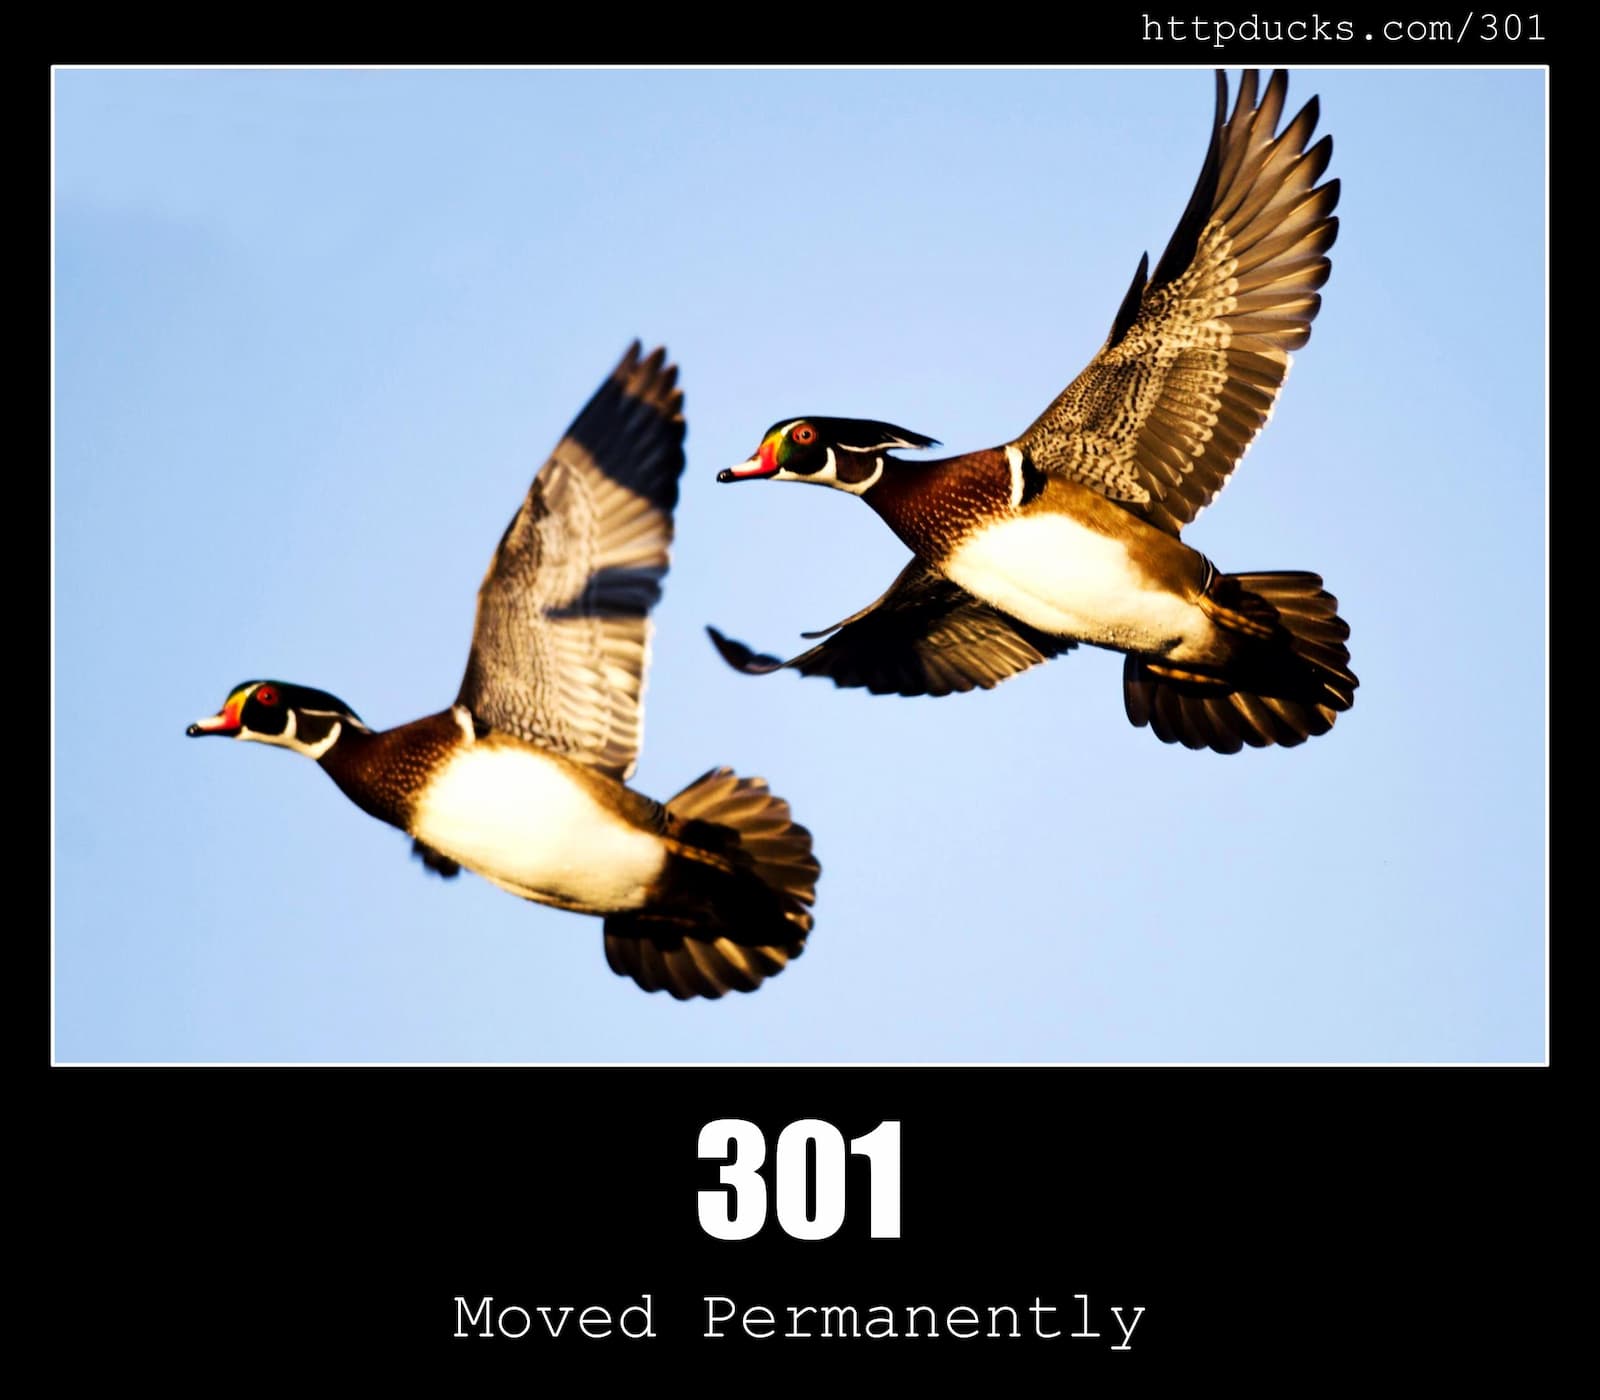 HTTP Status Code 301 Moved Permanently & Ducks